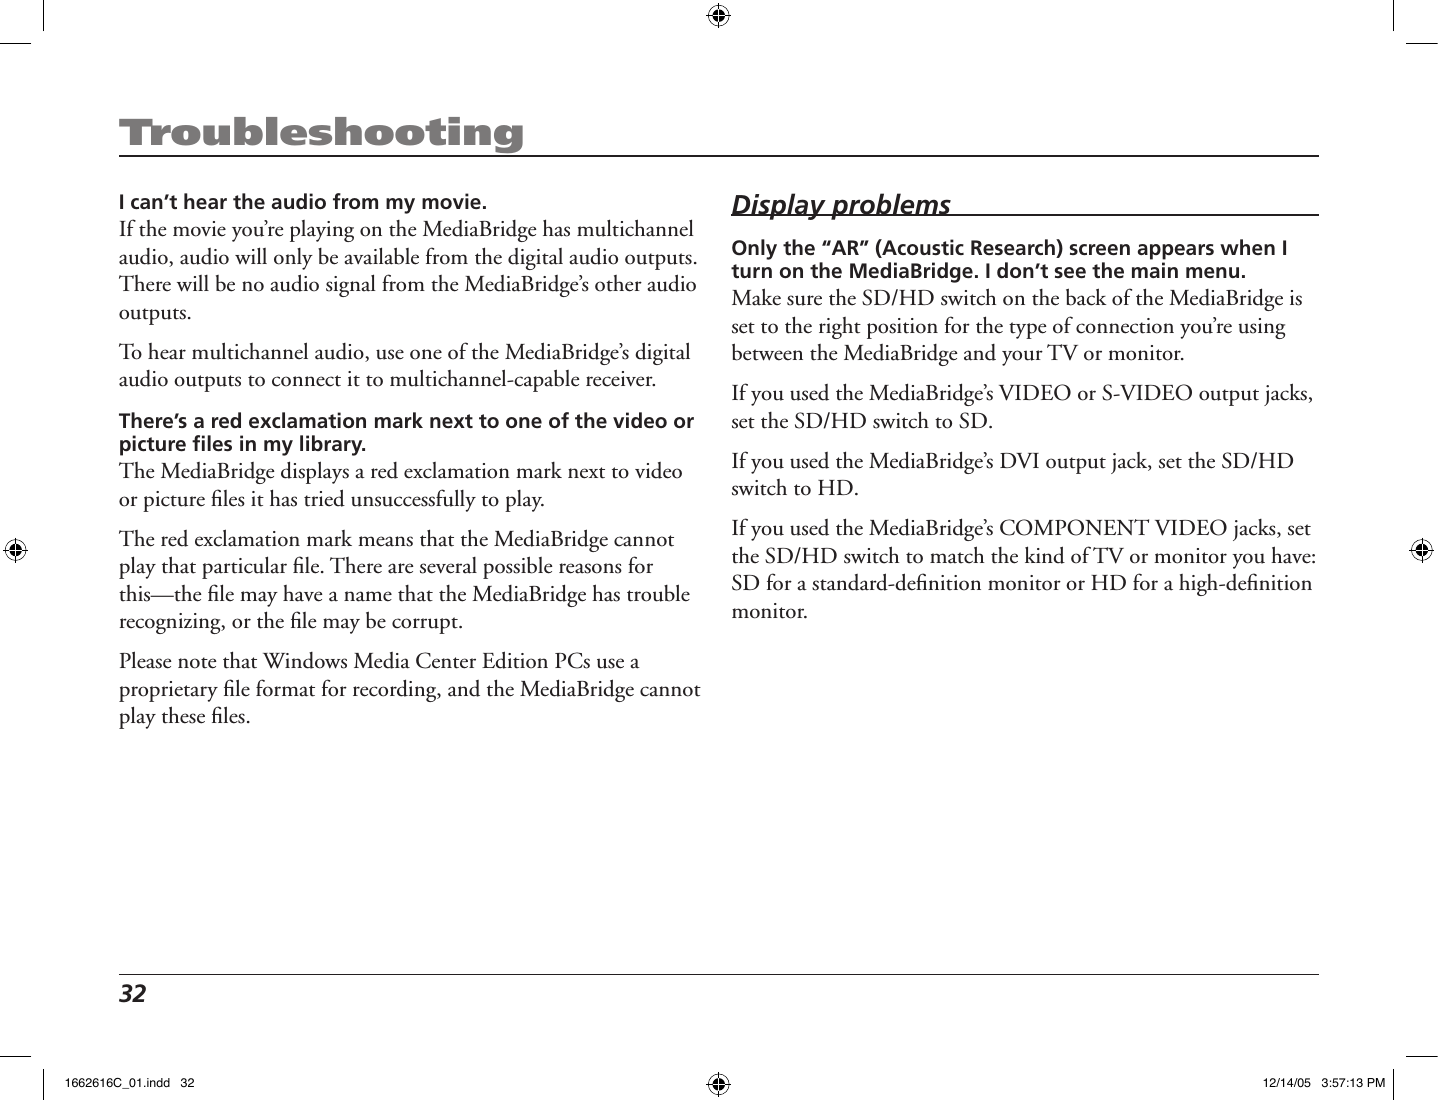 32 TroubleshootingI can’t hear the audio from my movie.If the movie you’re playing on the MediaBridge has multichannel audio, audio will only be available from the digital audio outputs. There will be no audio signal from the MediaBridge’s other audio outputs.To hear multichannel audio, use one of the MediaBridge’s digital audio outputs to connect it to multichannel-capable receiver.There’s a red exclamation mark next to one of the video or picture ﬁles in my library.The MediaBridge displays a red exclamation mark next to video or picture ﬁles it has tried unsuccessfully to play. The red exclamation mark means that the MediaBridge cannot play that particular ﬁle. There are several possible reasons for this—the ﬁle may have a name that the MediaBridge has trouble recognizing, or the ﬁle may be corrupt. Please note that Windows Media Center Edition PCs use a proprietary ﬁle format for recording, and the MediaBridge cannot play these ﬁles.Display problemsOnly the “AR” (Acoustic Research) screen appears when I turn on the MediaBridge. I don’t see the main menu.Make sure the SD/HD switch on the back of the MediaBridge is set to the right position for the type of connection you’re using between the MediaBridge and your TV or monitor. If you used the MediaBridge’s VIDEO or S-VIDEO output jacks, set the SD/HD switch to SD.If you used the MediaBridge’s DVI output jack, set the SD/HD switch to HD.If you used the MediaBridge’s COMPONENT VIDEO jacks, set the SD/HD switch to match the kind of TV or monitor you have: SD for a standard-deﬁnition monitor or HD for a high-deﬁnition monitor.1662616C_01.indd   32 12/14/05   3:57:13 PM